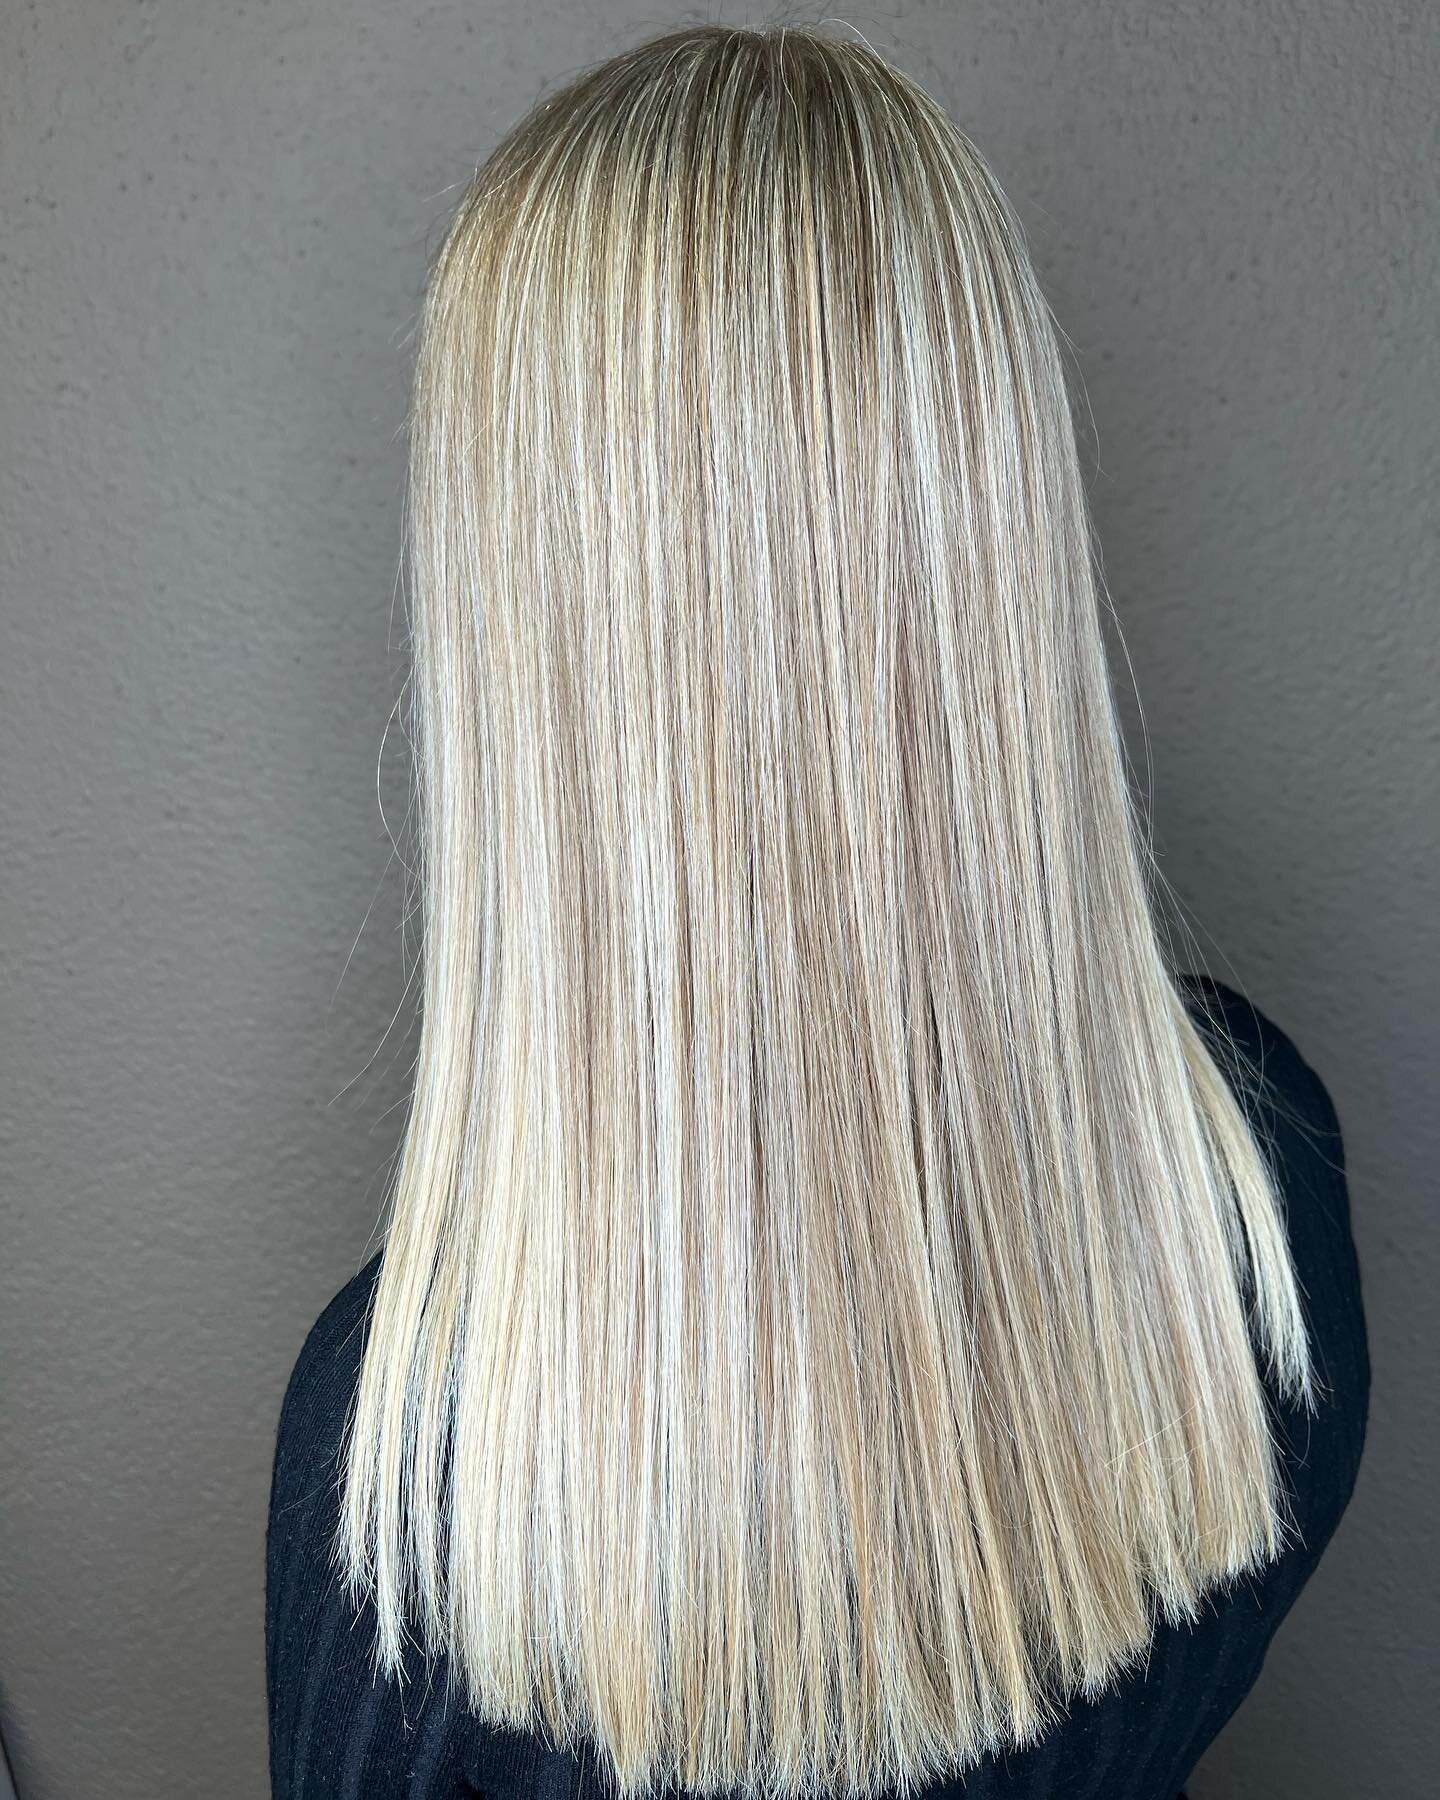 Made by Martina#blonde #highlights #blondehair